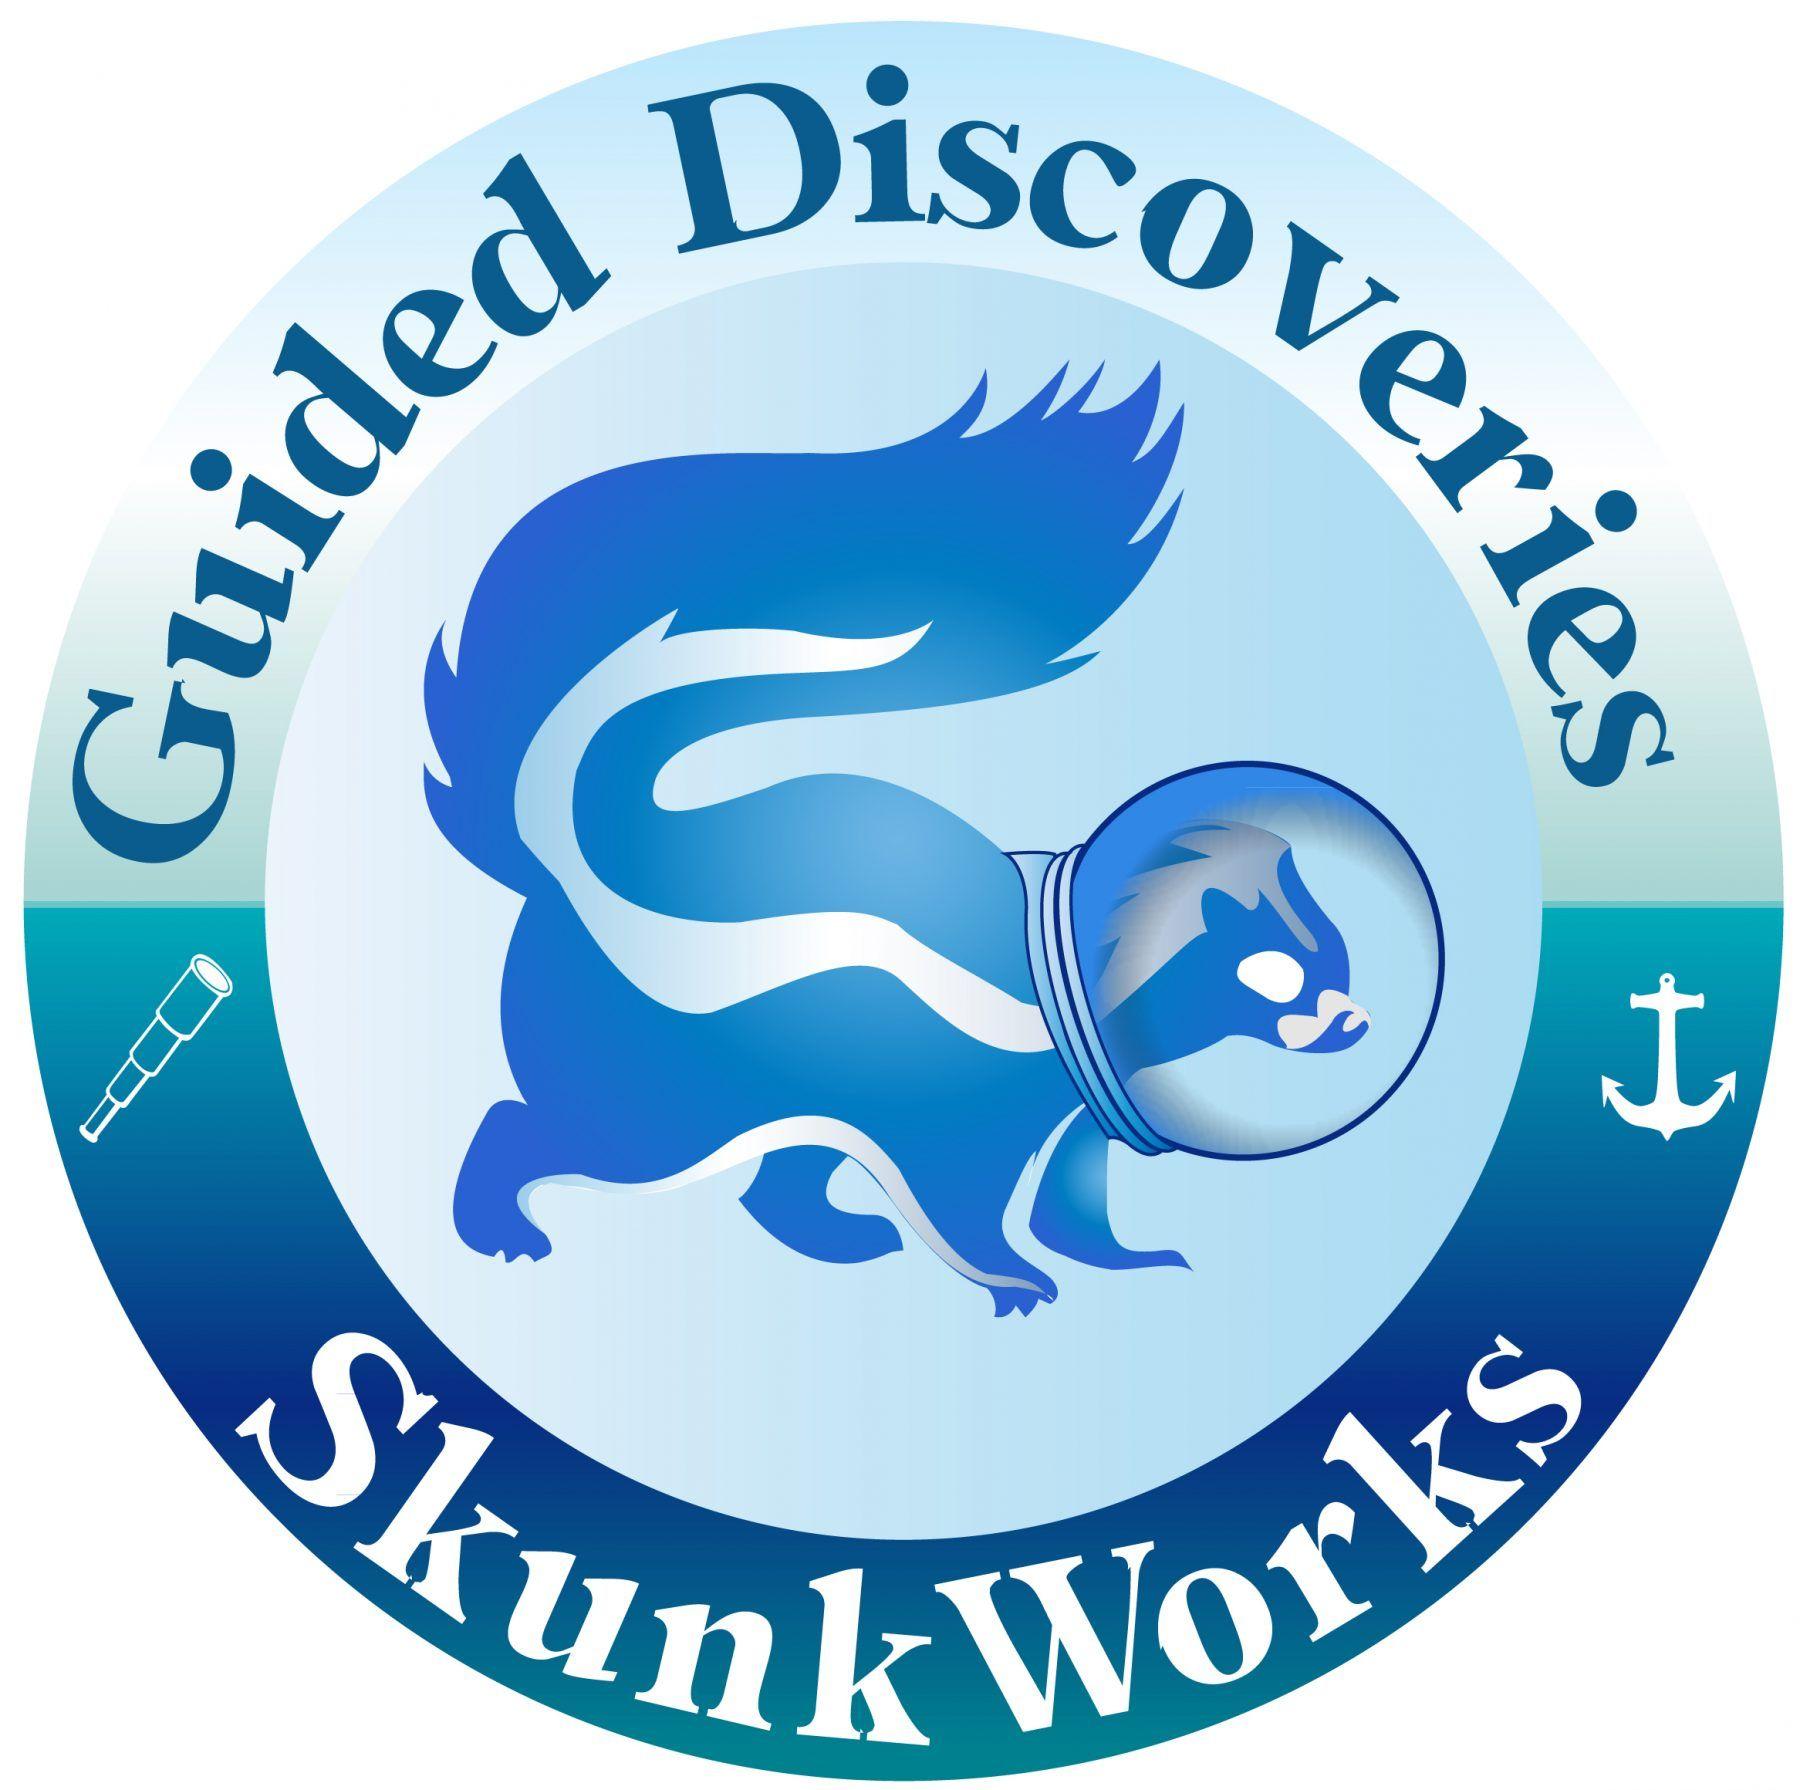 Skunkworks Logo - Research and Development - Guided DiscoveriesGuided Discoveries